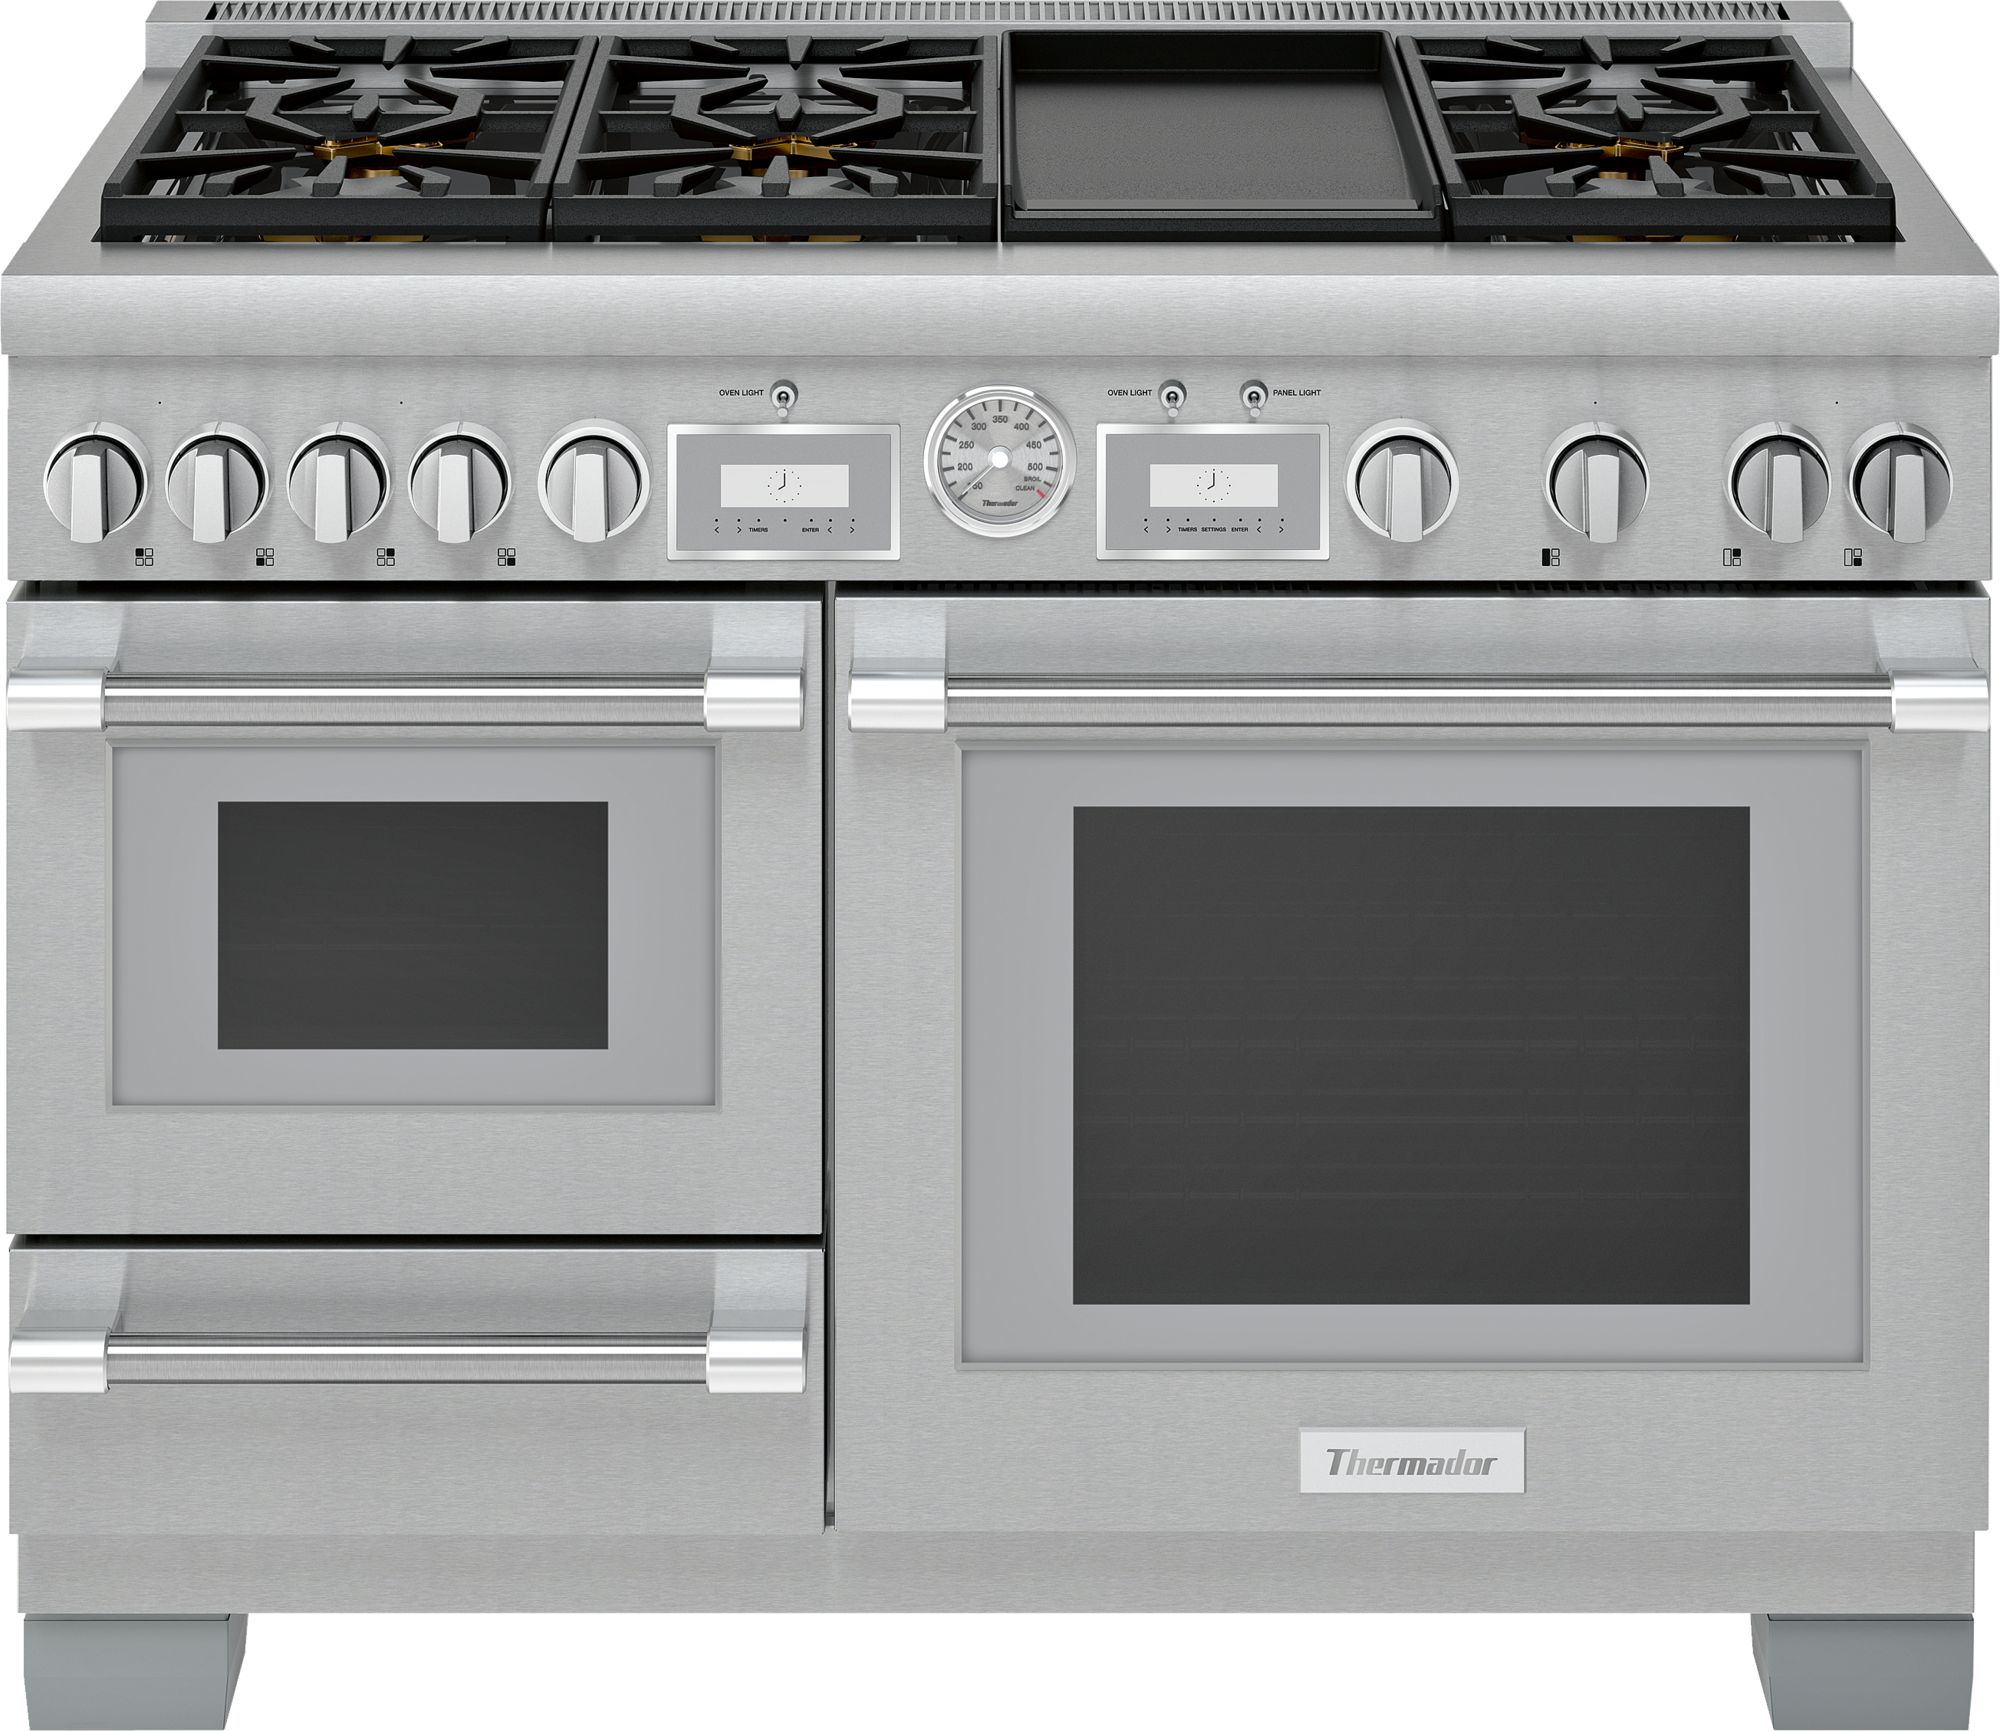 Thermador Dual Fuel Professional Range, 48″/121 cm, Pro Grand Professional Series, Stainless Steel